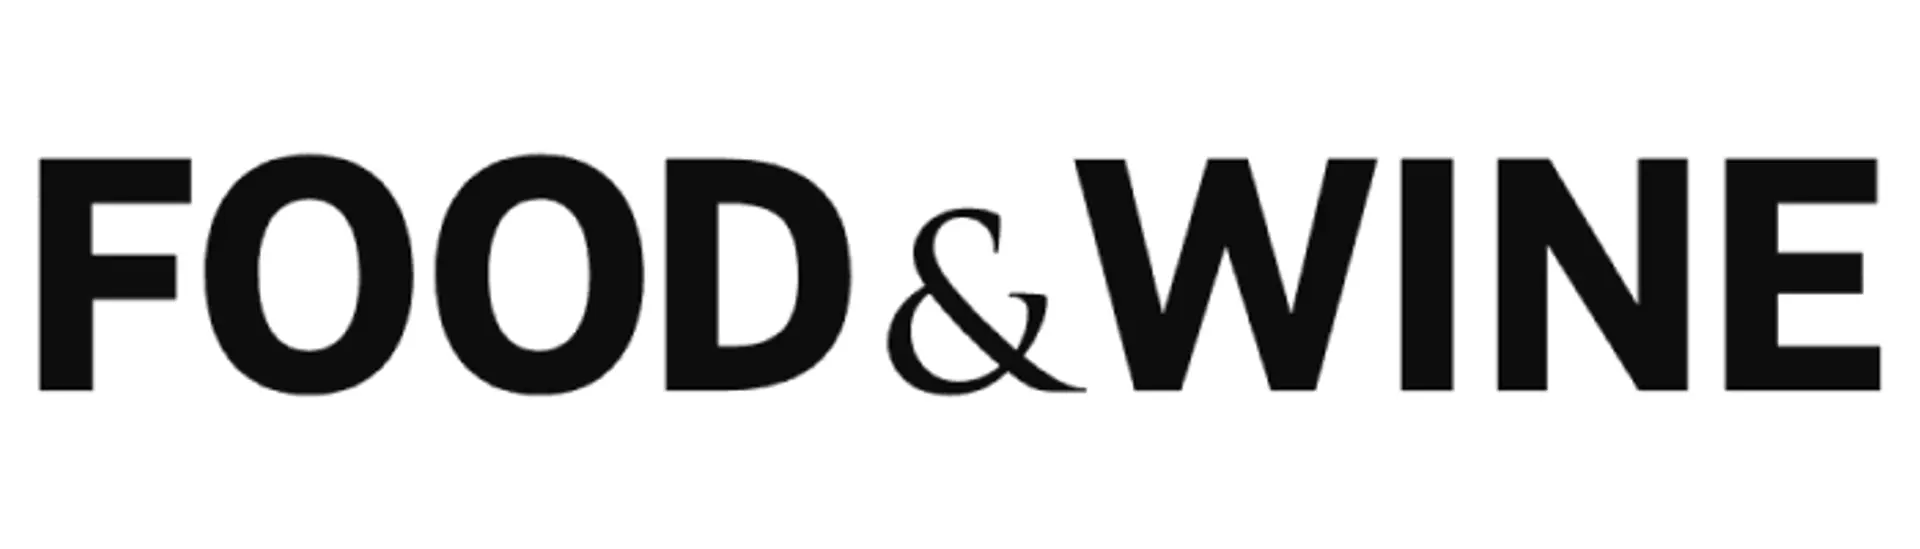 Black text on a white background that reads "FOOD & WINE" in capitalized letters for a logo.